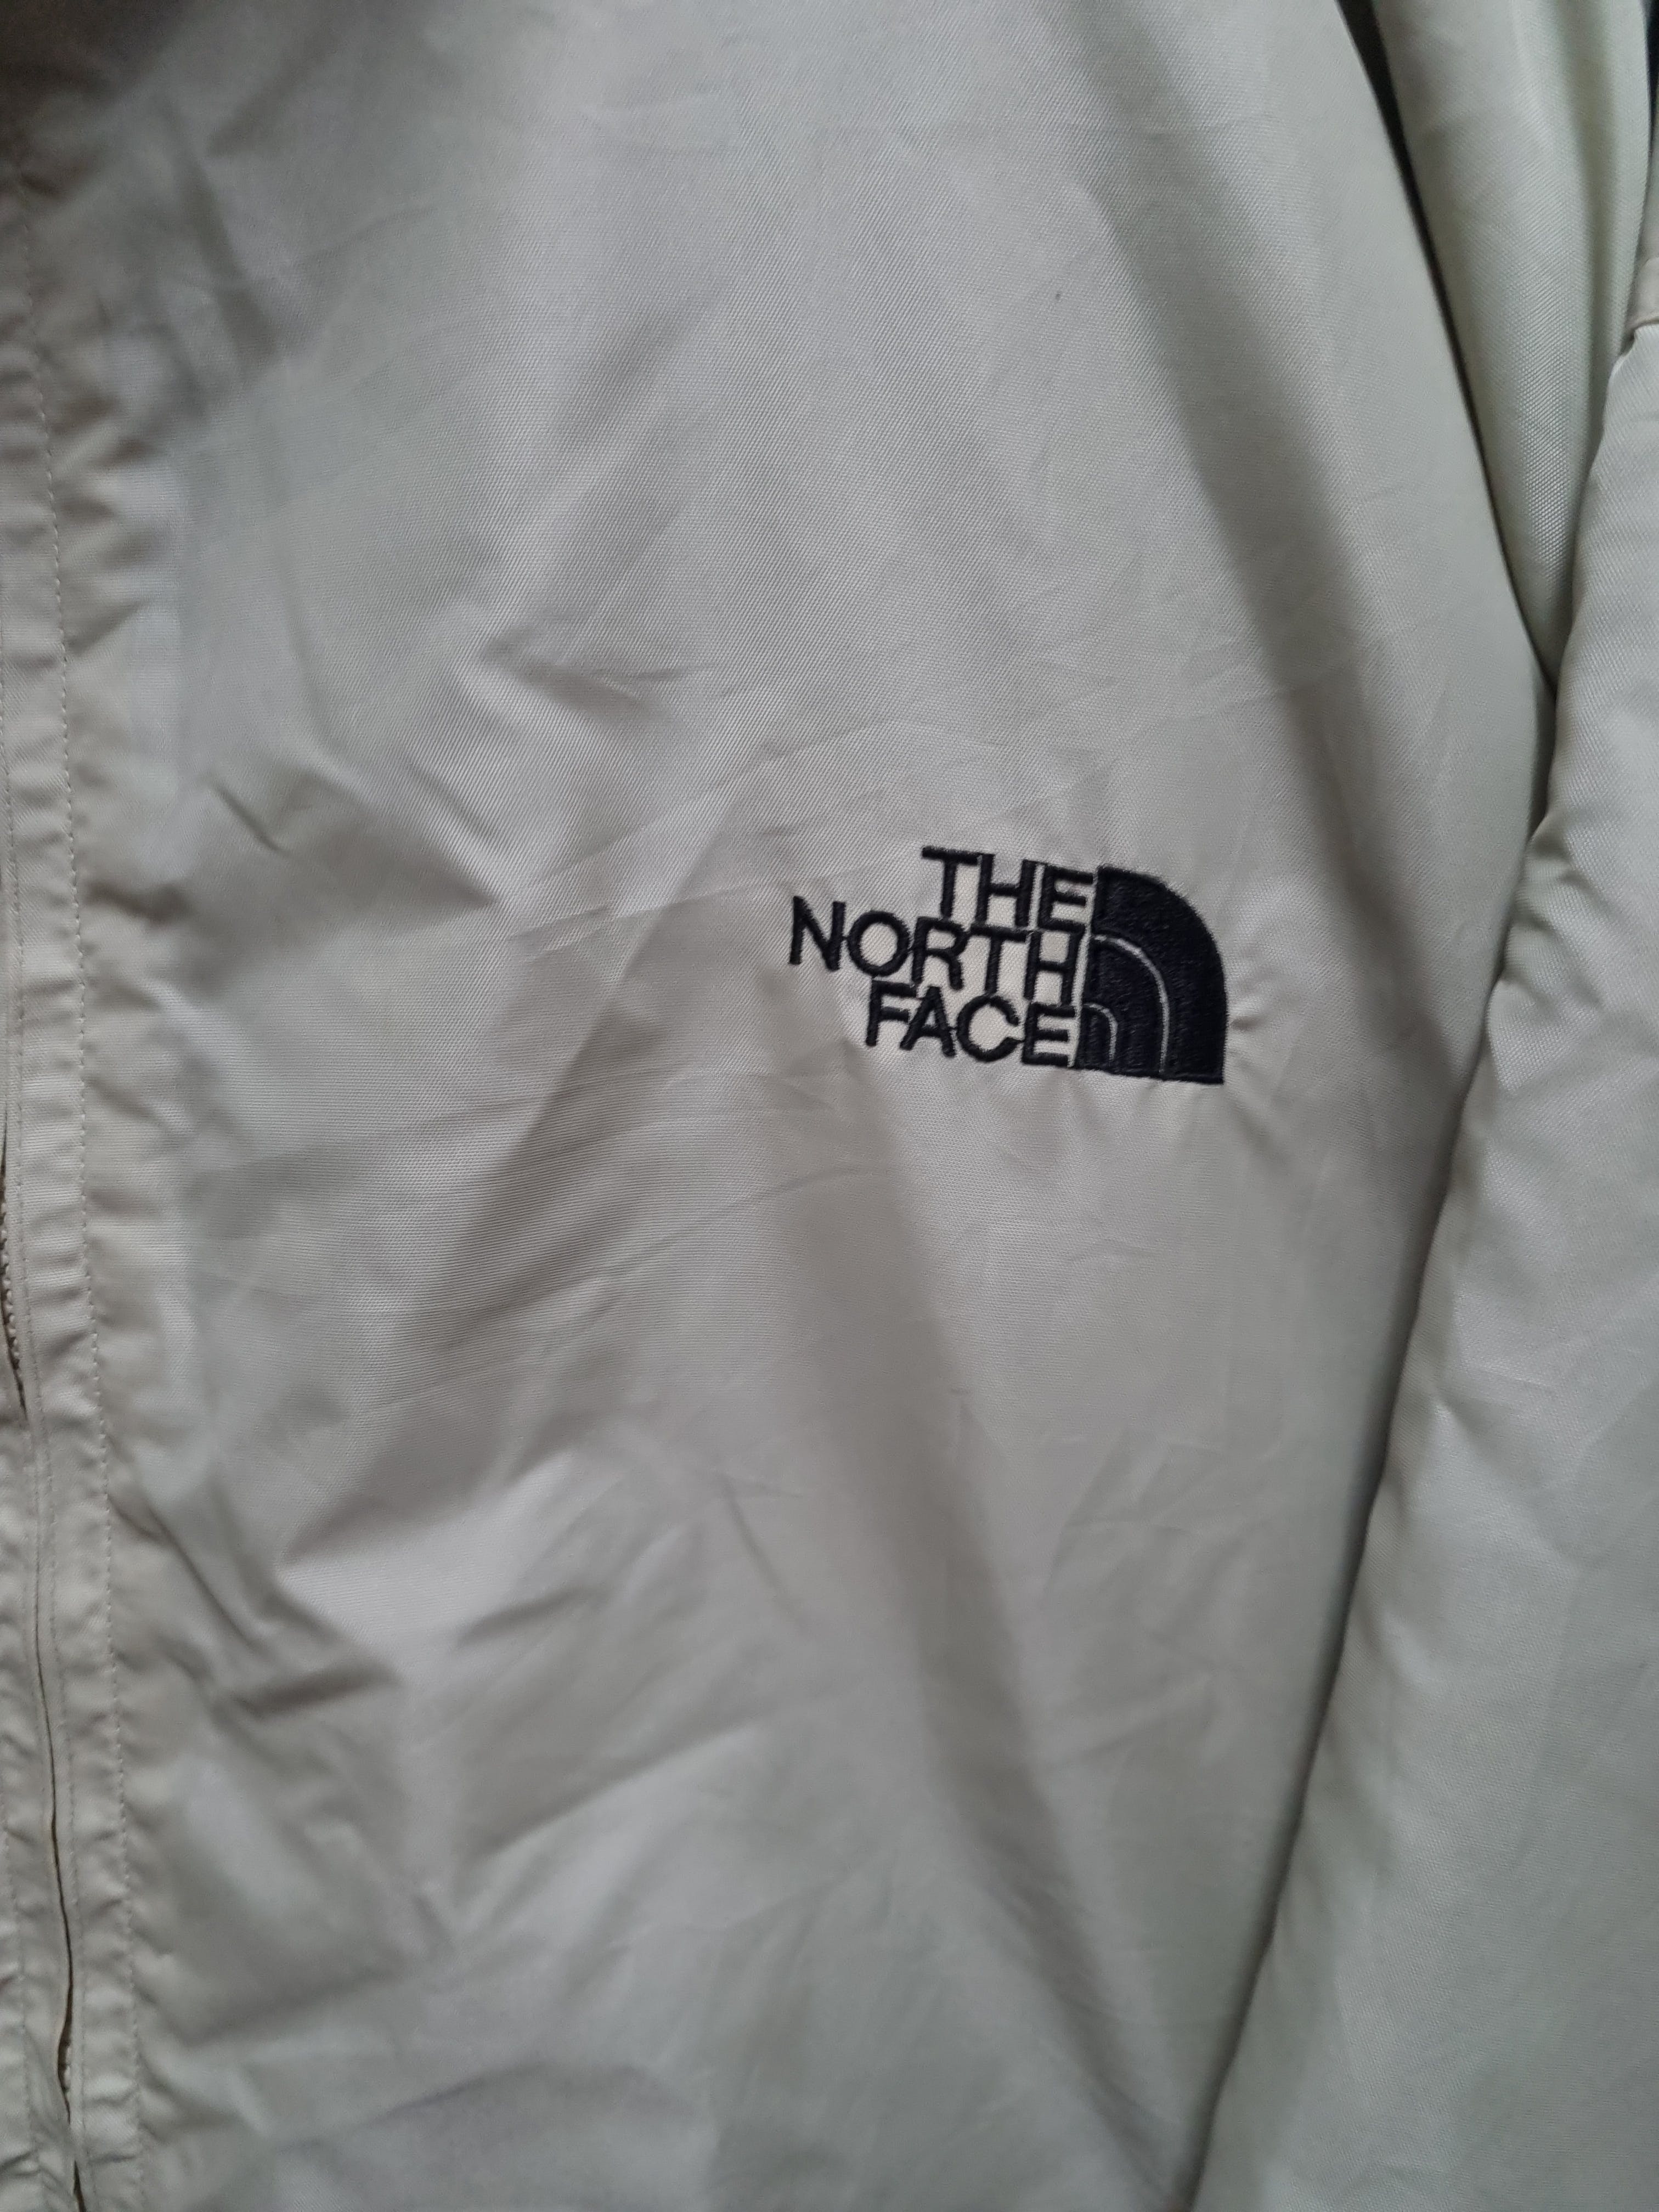 🔥 SALE🔥The North Face Zipper Jacket - 6